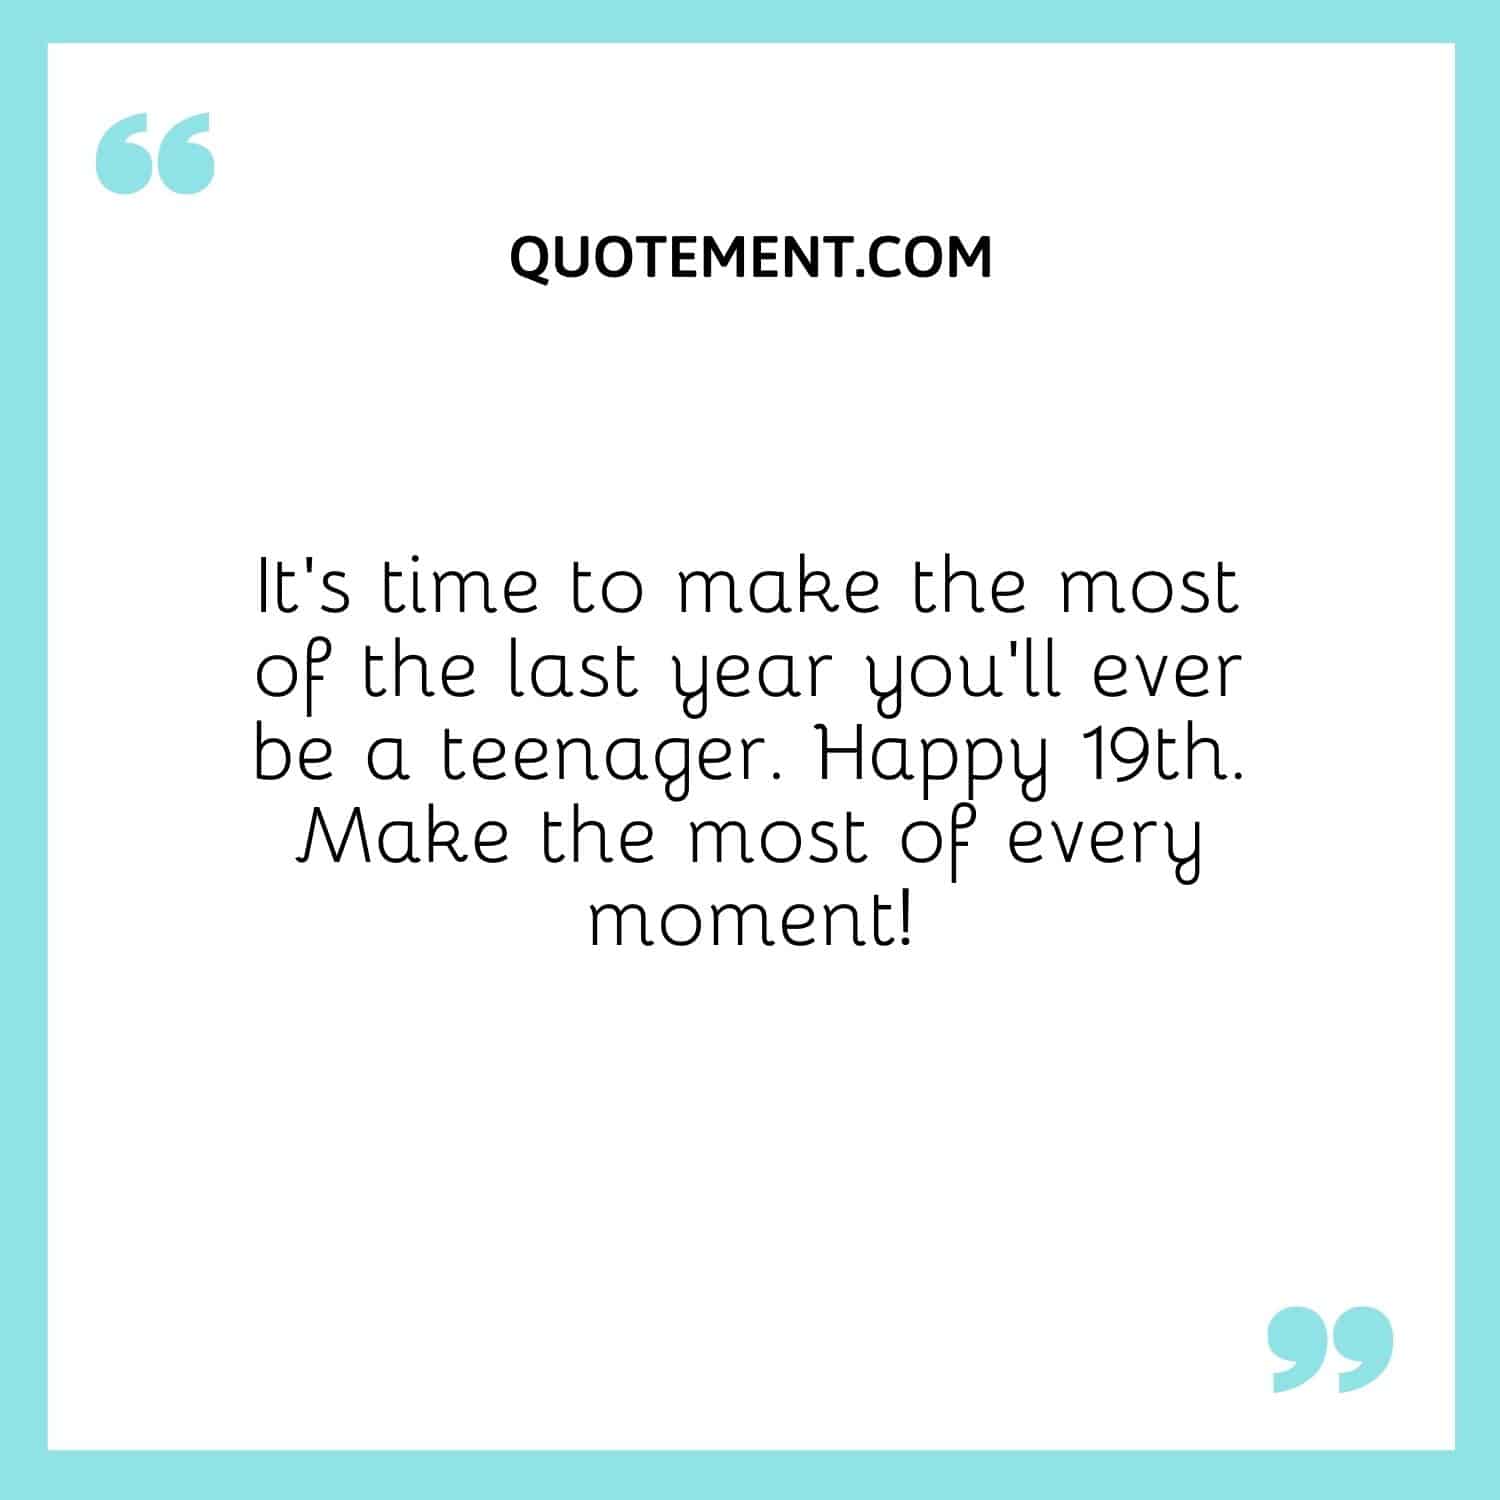 It’s time to make the most of the last year you’ll ever be a teenager